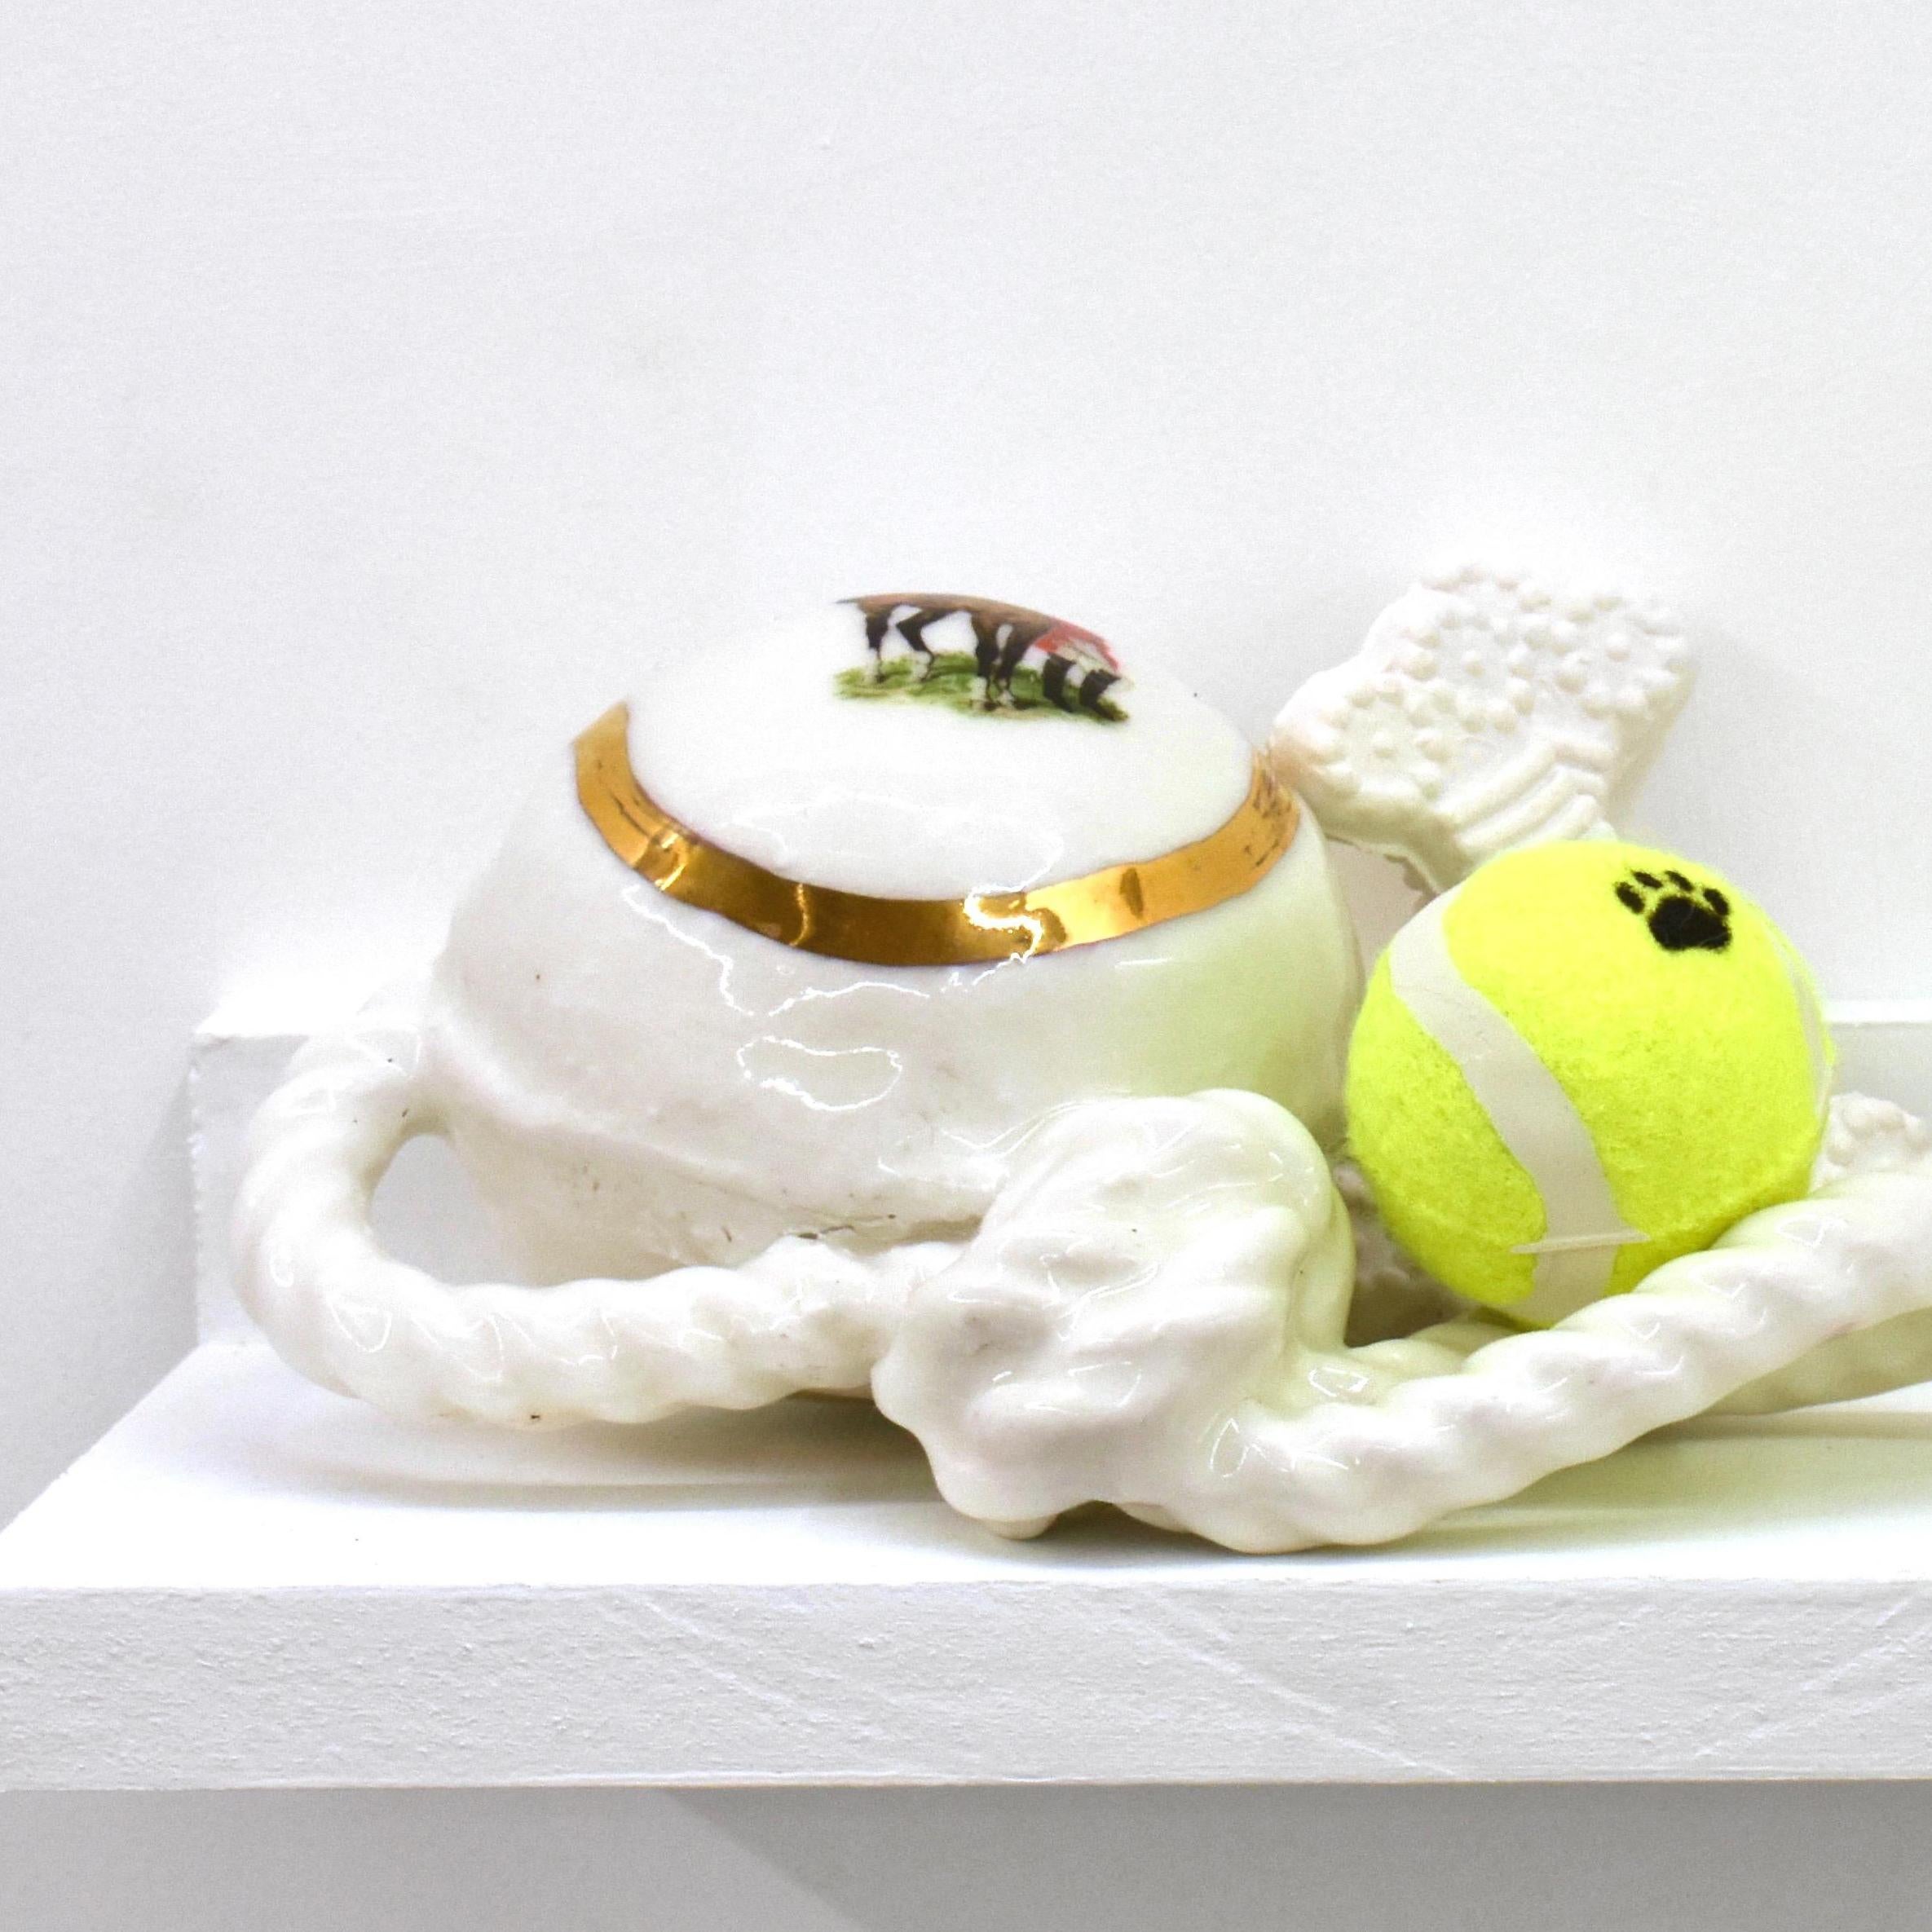 Chew Toys 2 - Contemporary Sculpture by Nicholas Crombach